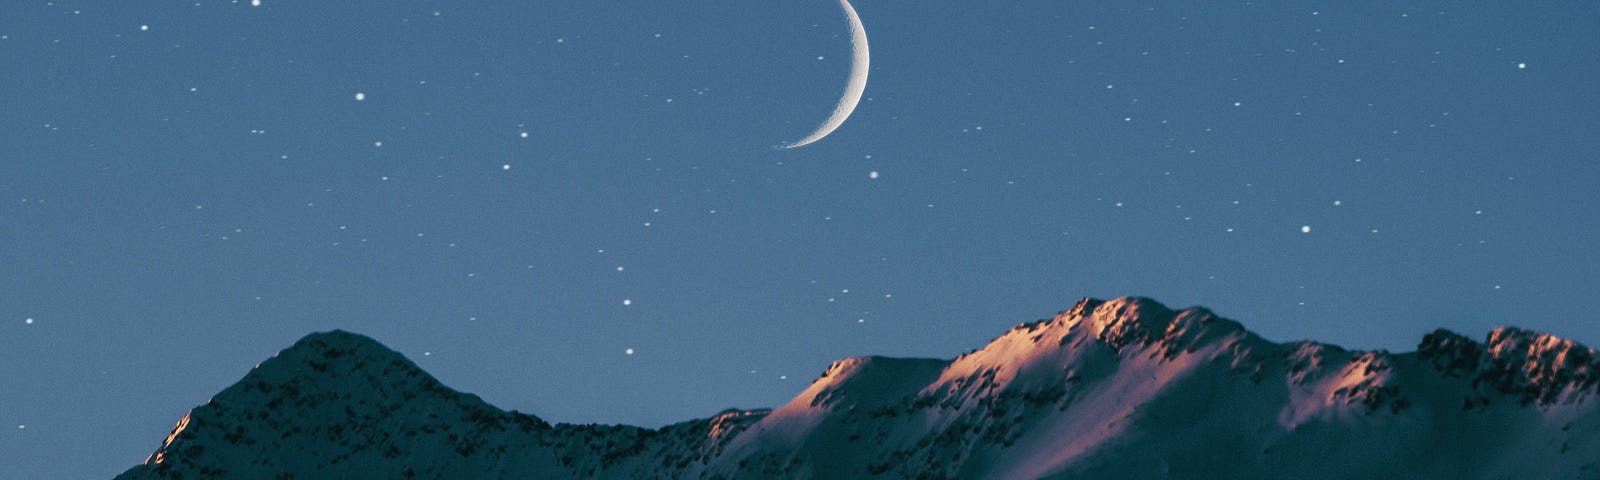 The new moon in a star filled sky over snow touched mountain peaks